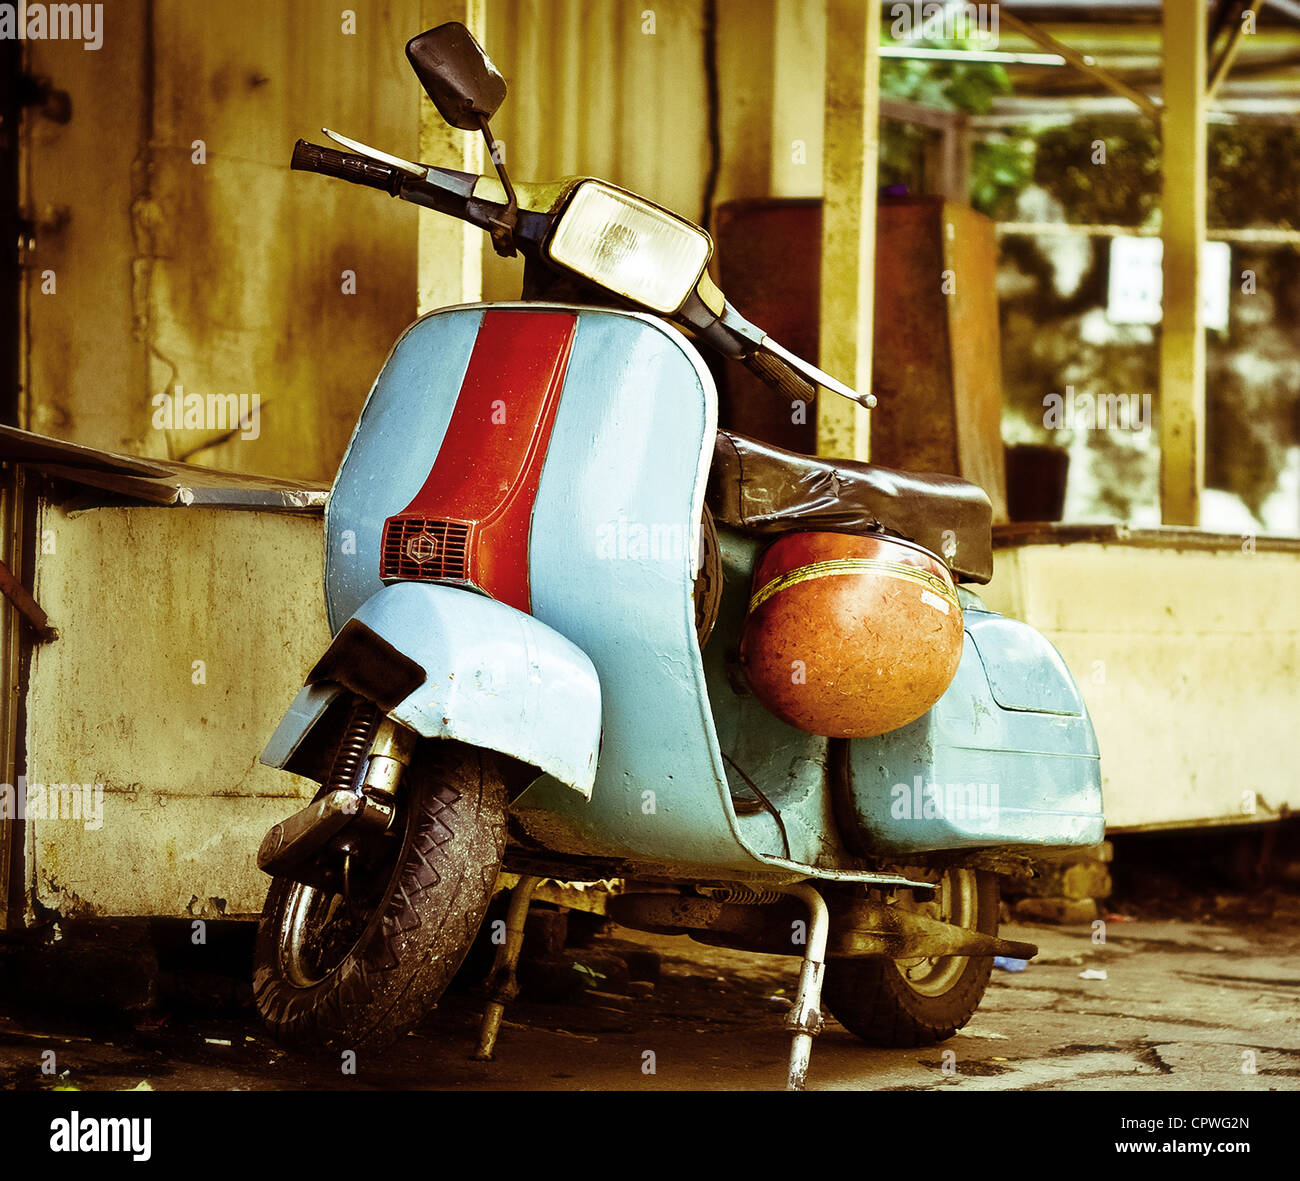 old vespa moped in china town KL malasia Stock Photo